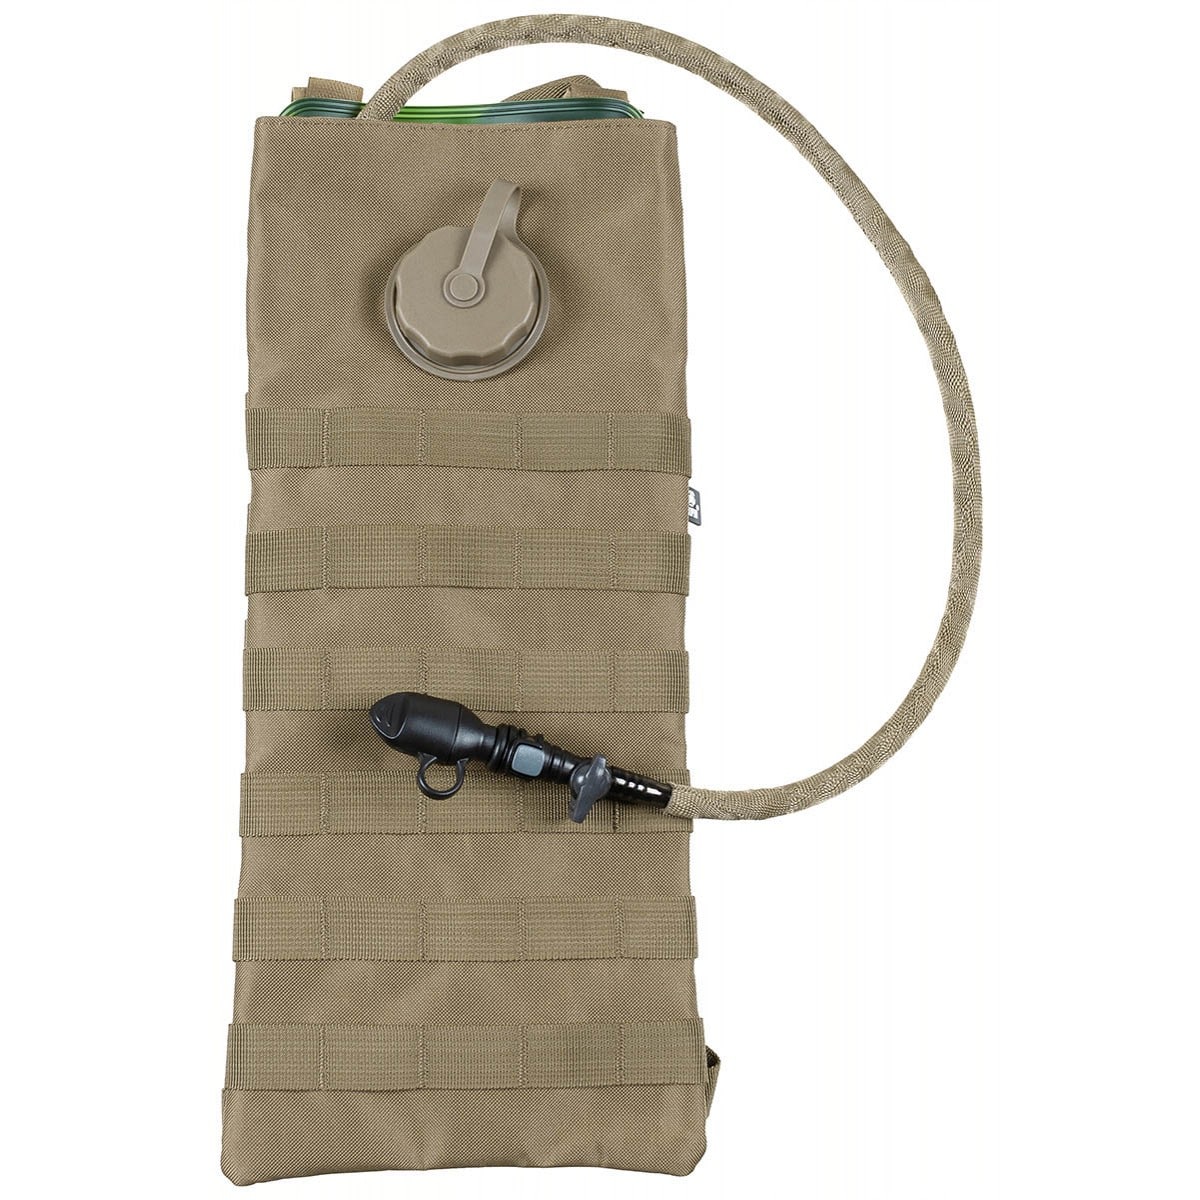 System hydracyjny MFH Molle Hydration Pack 2,5L - Coyote